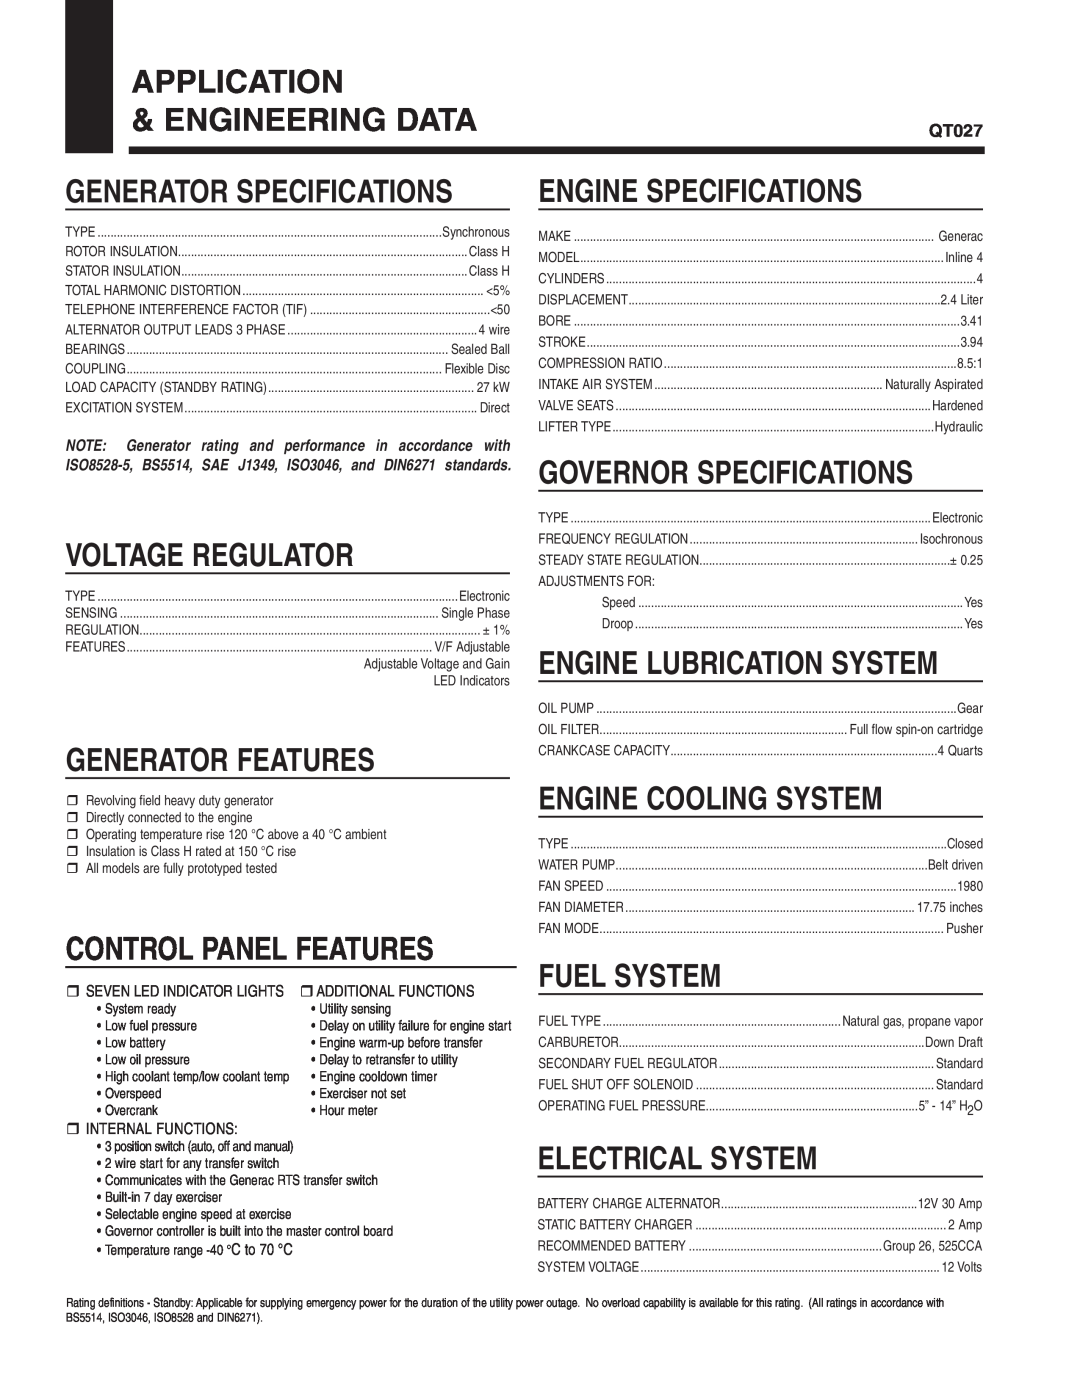 Generac Power Systems QT02724JNAX Application, Engineering Data, Engine Specifications, Voltage Regulator, Fuel System 